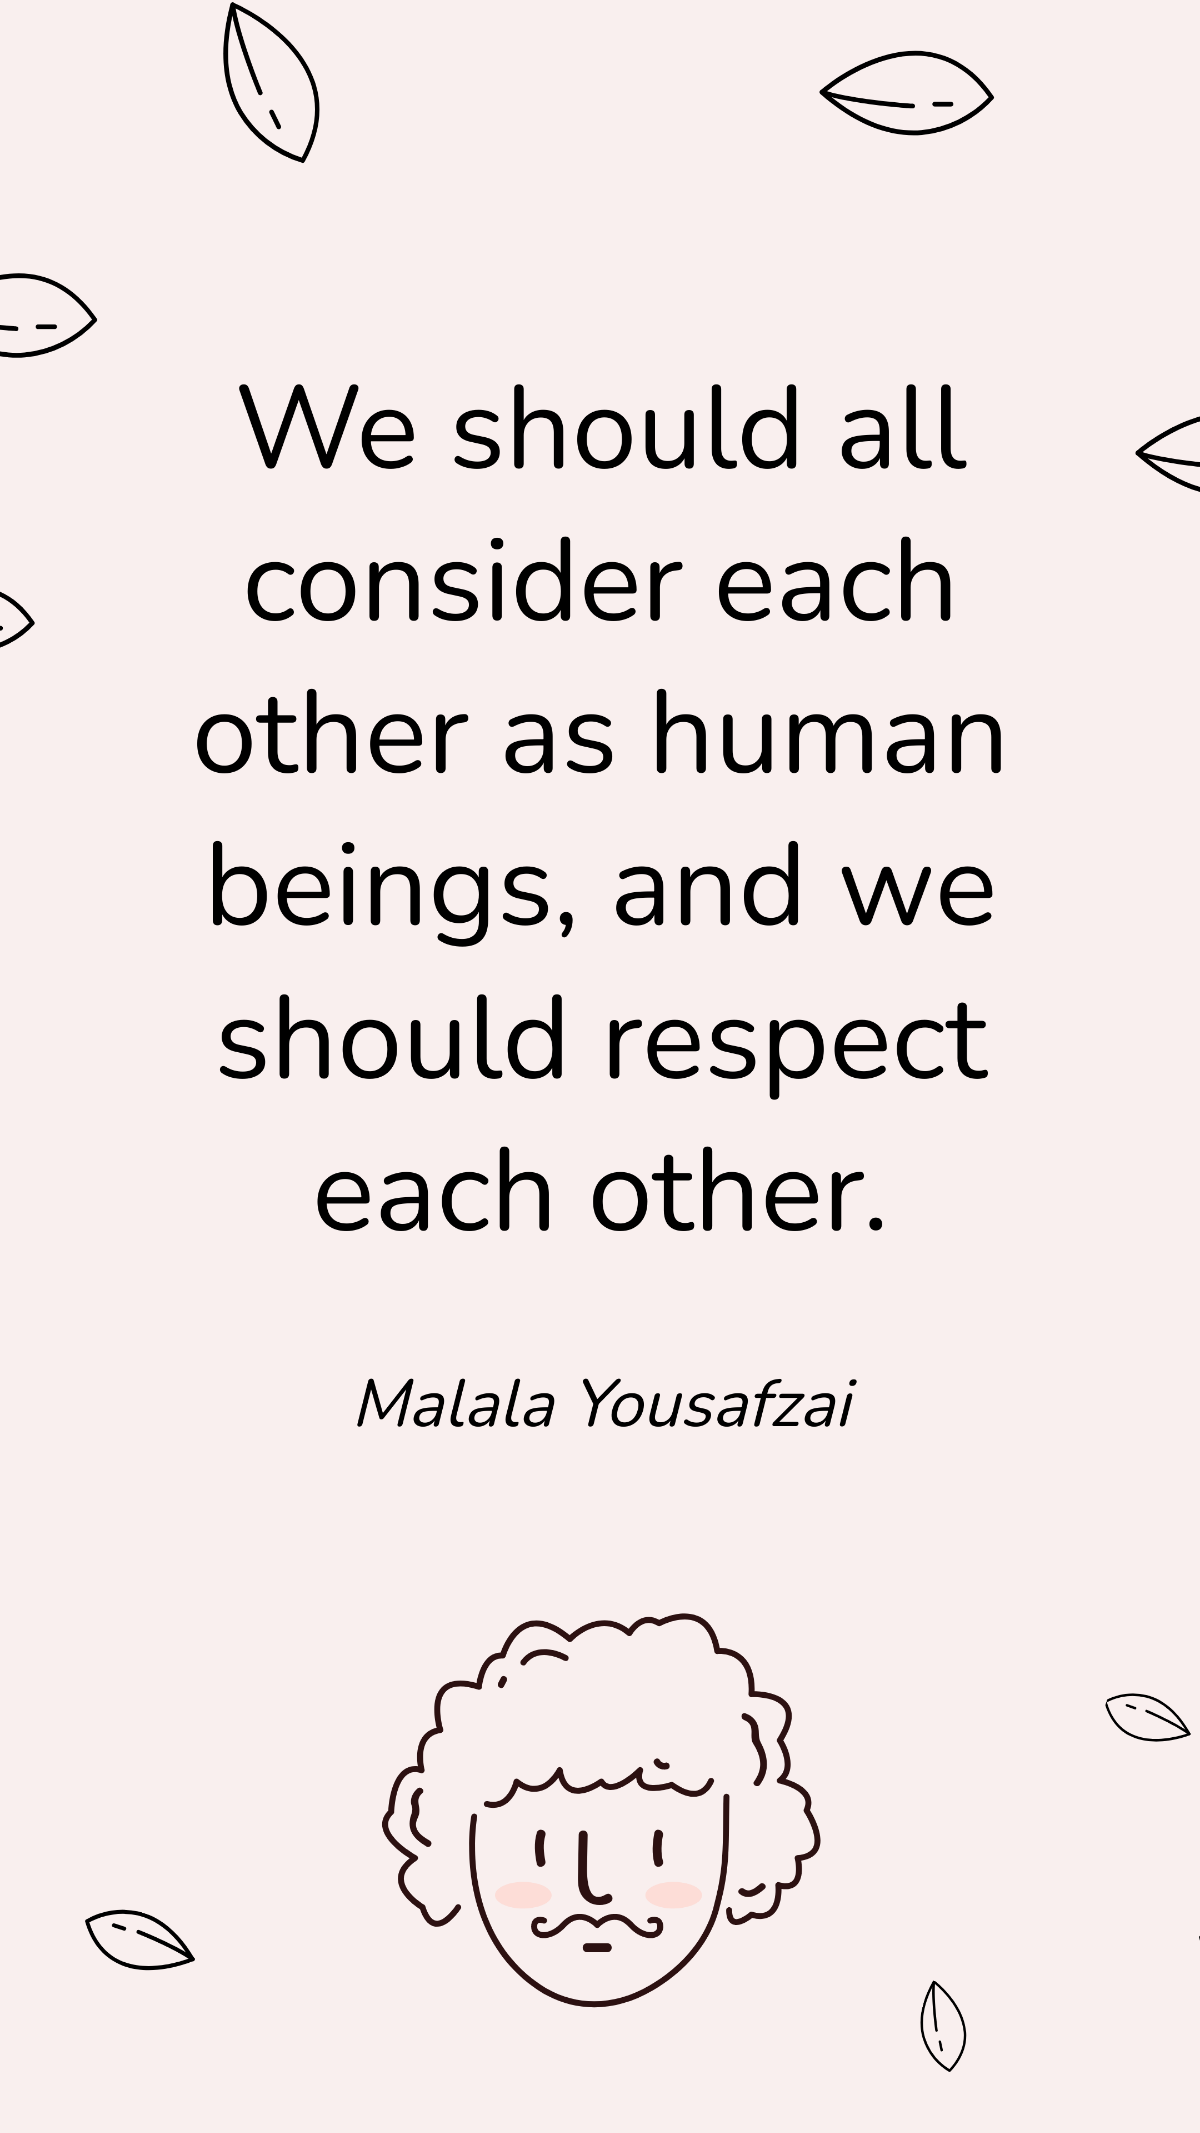 Malala Yousafzai - We should all consider each other as human beings, and we should respect each other. Template